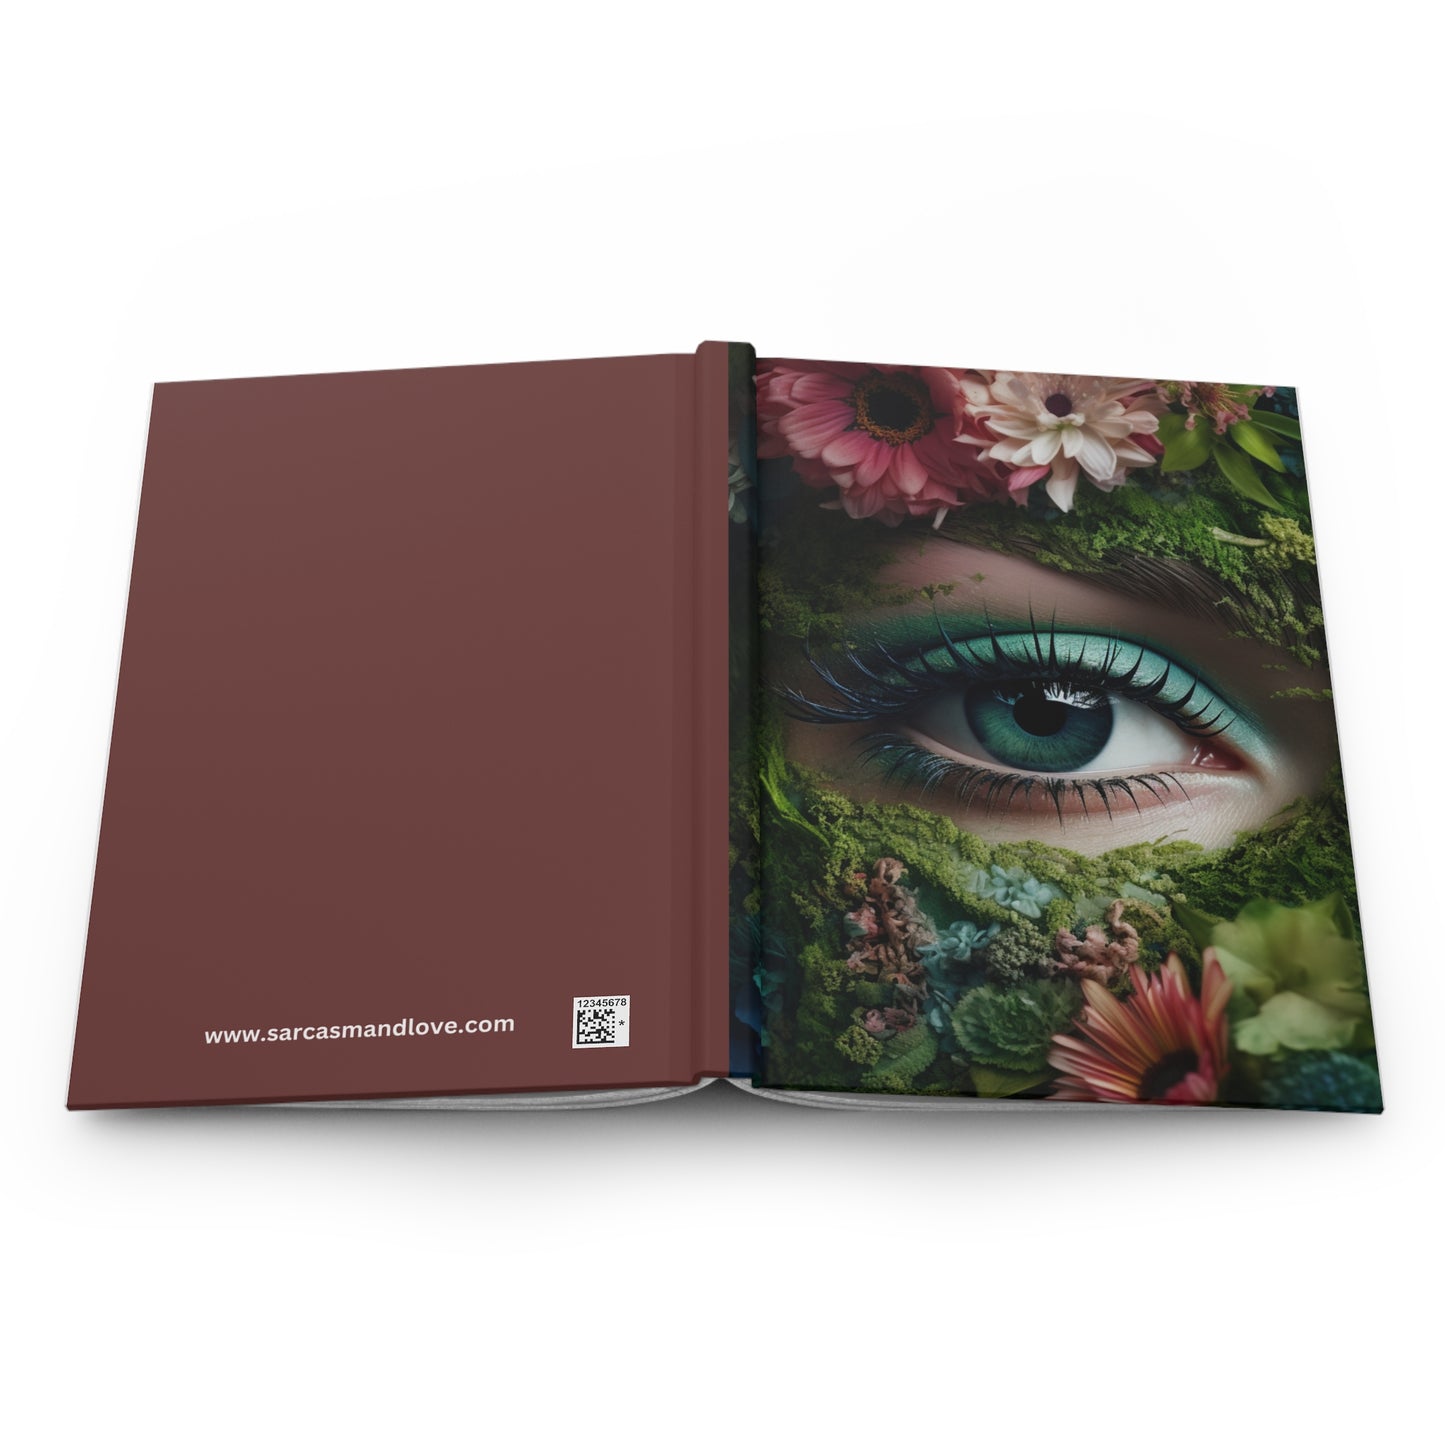 Hyperrealistic Eye Floral Hardcover Notebook | Journal with Moss & Flower Design | Artistic Diary | Creative Writing | Unique Gift Idea